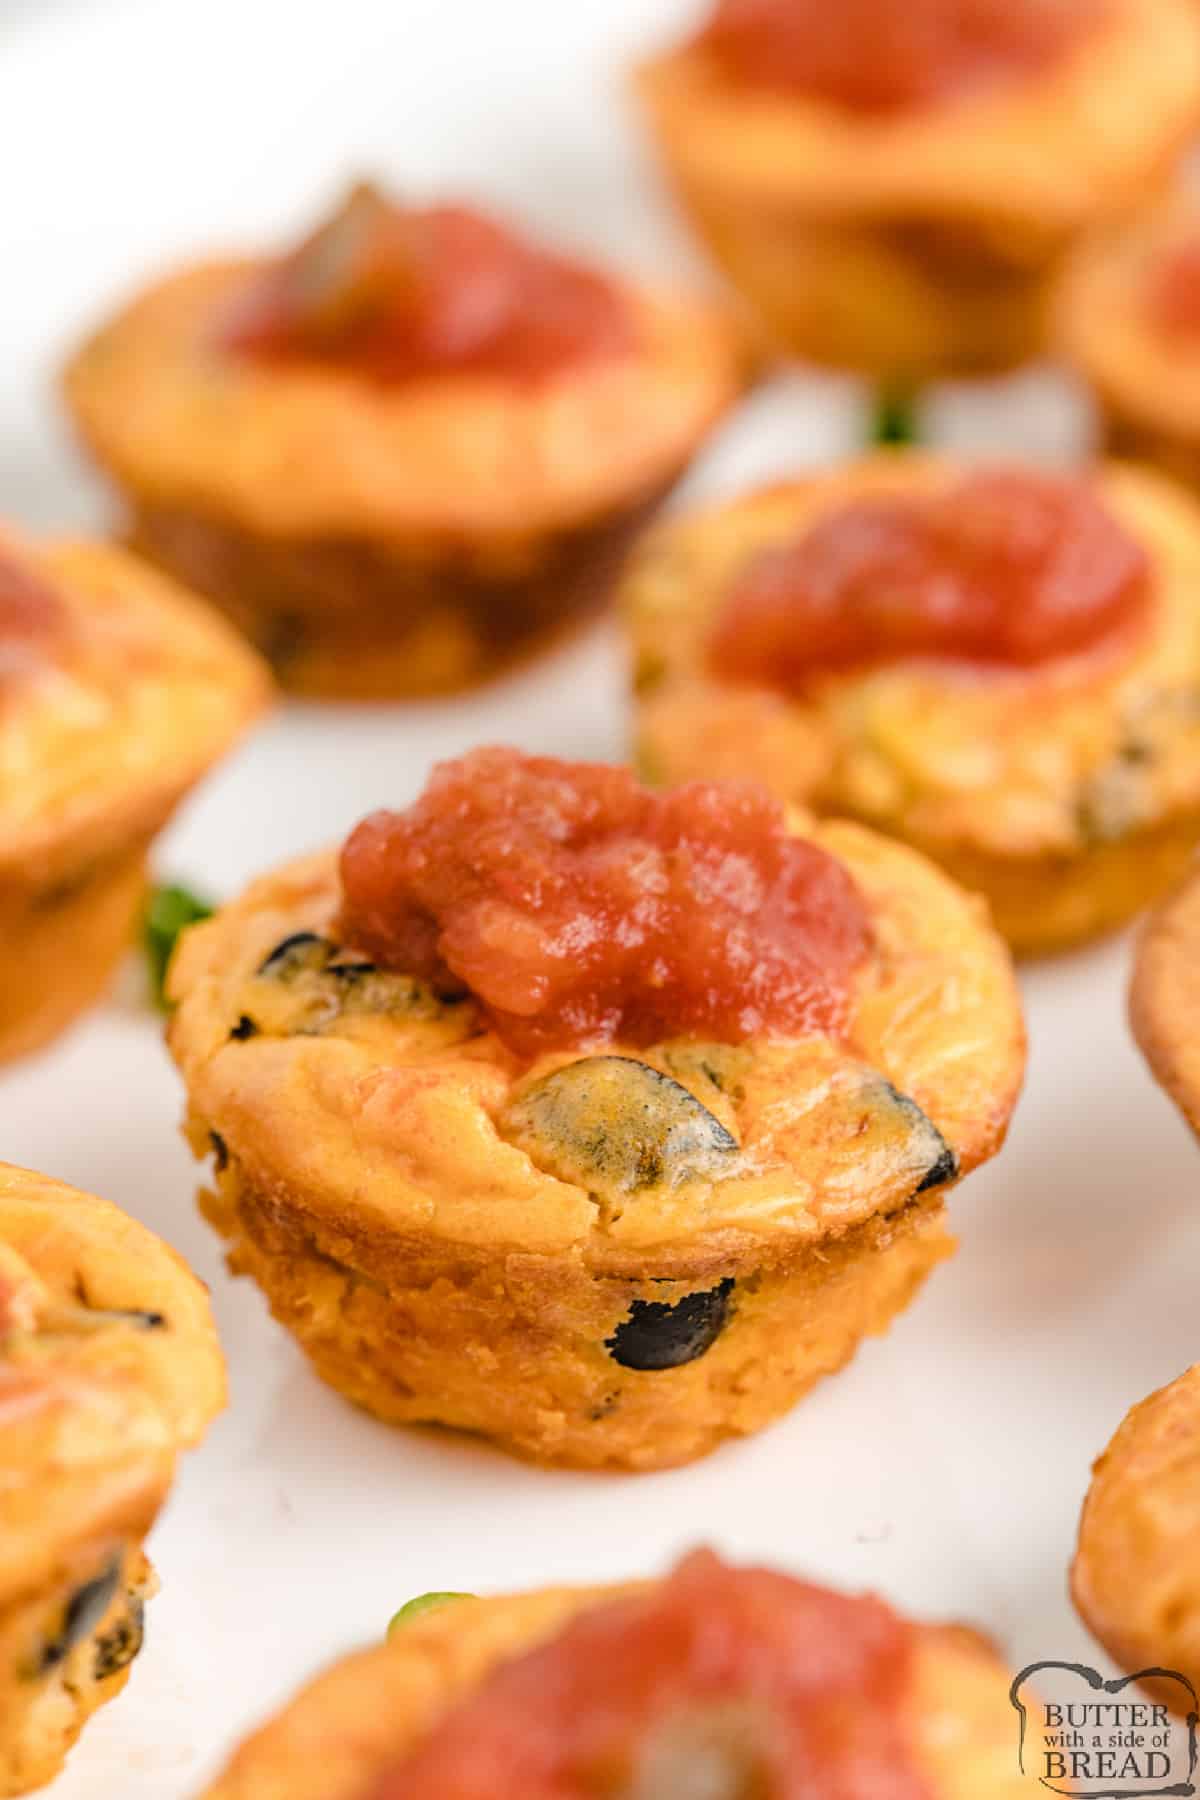 Easy Salsa Bites are a simple, gluten free appetizer made with cream cheese, salsa, eggs and cheese. Cheesy and perfectly portioned, these little bites make great snacks and are easy to take to a party!